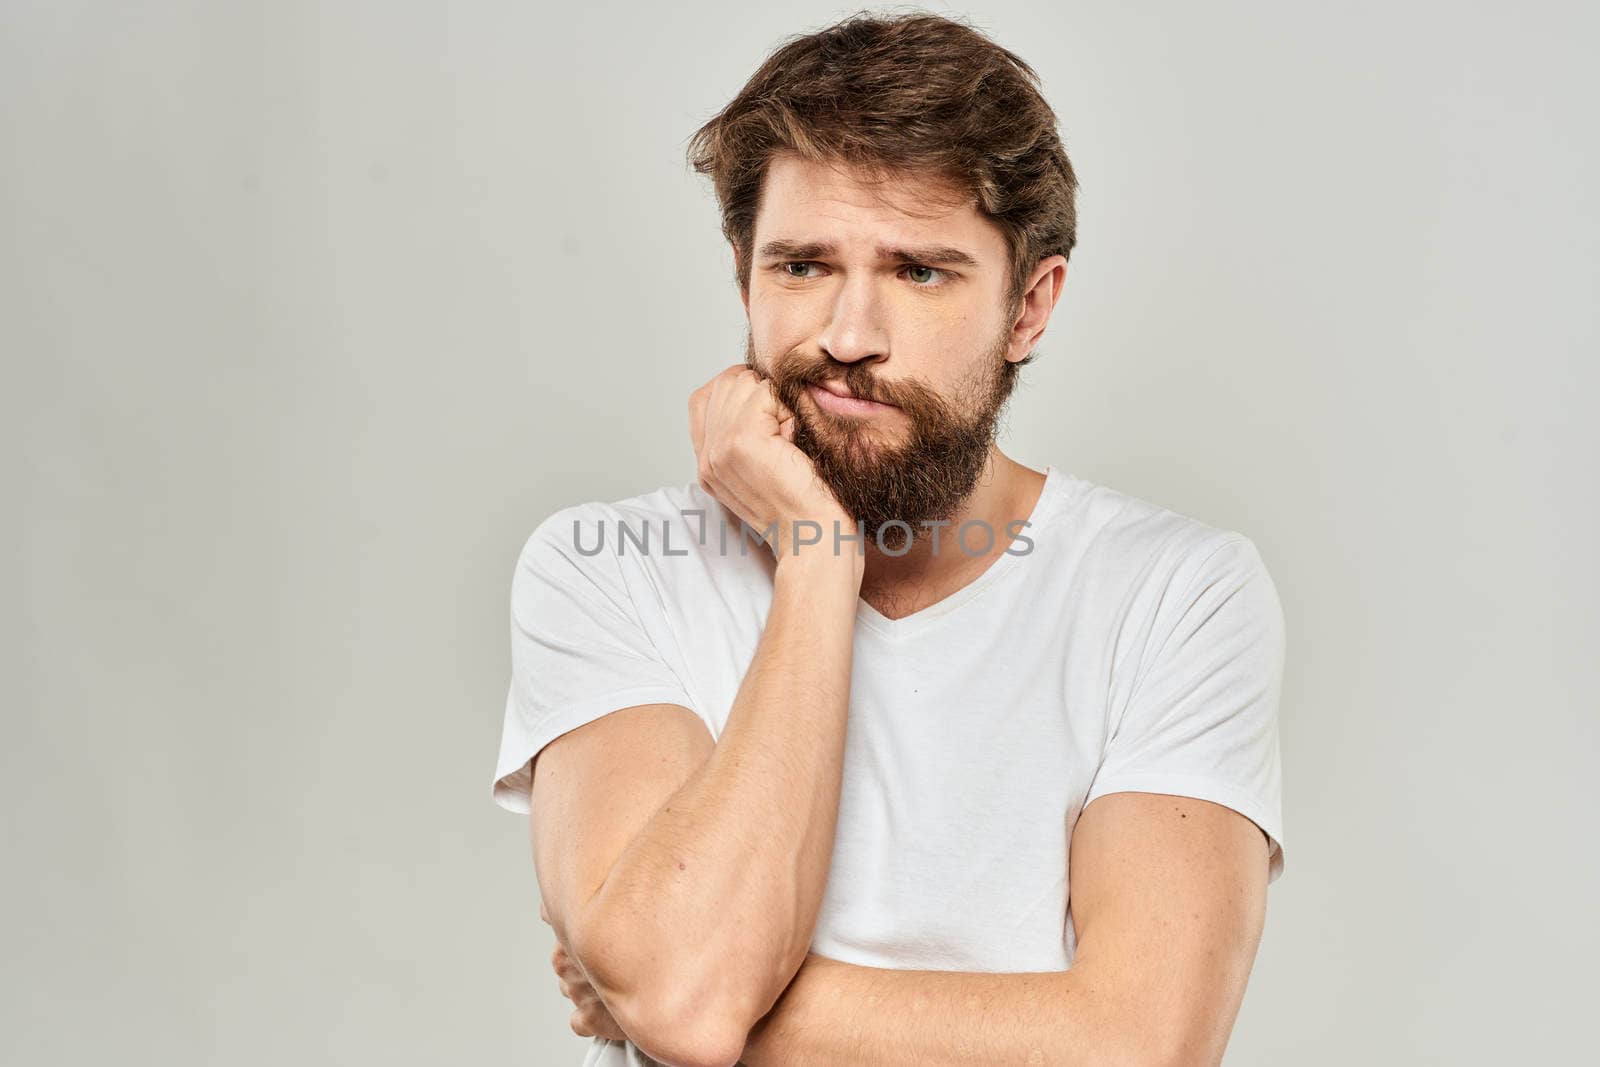 A man in a white t-shirt with a beard emotions displeased facial expression light background by SHOTPRIME